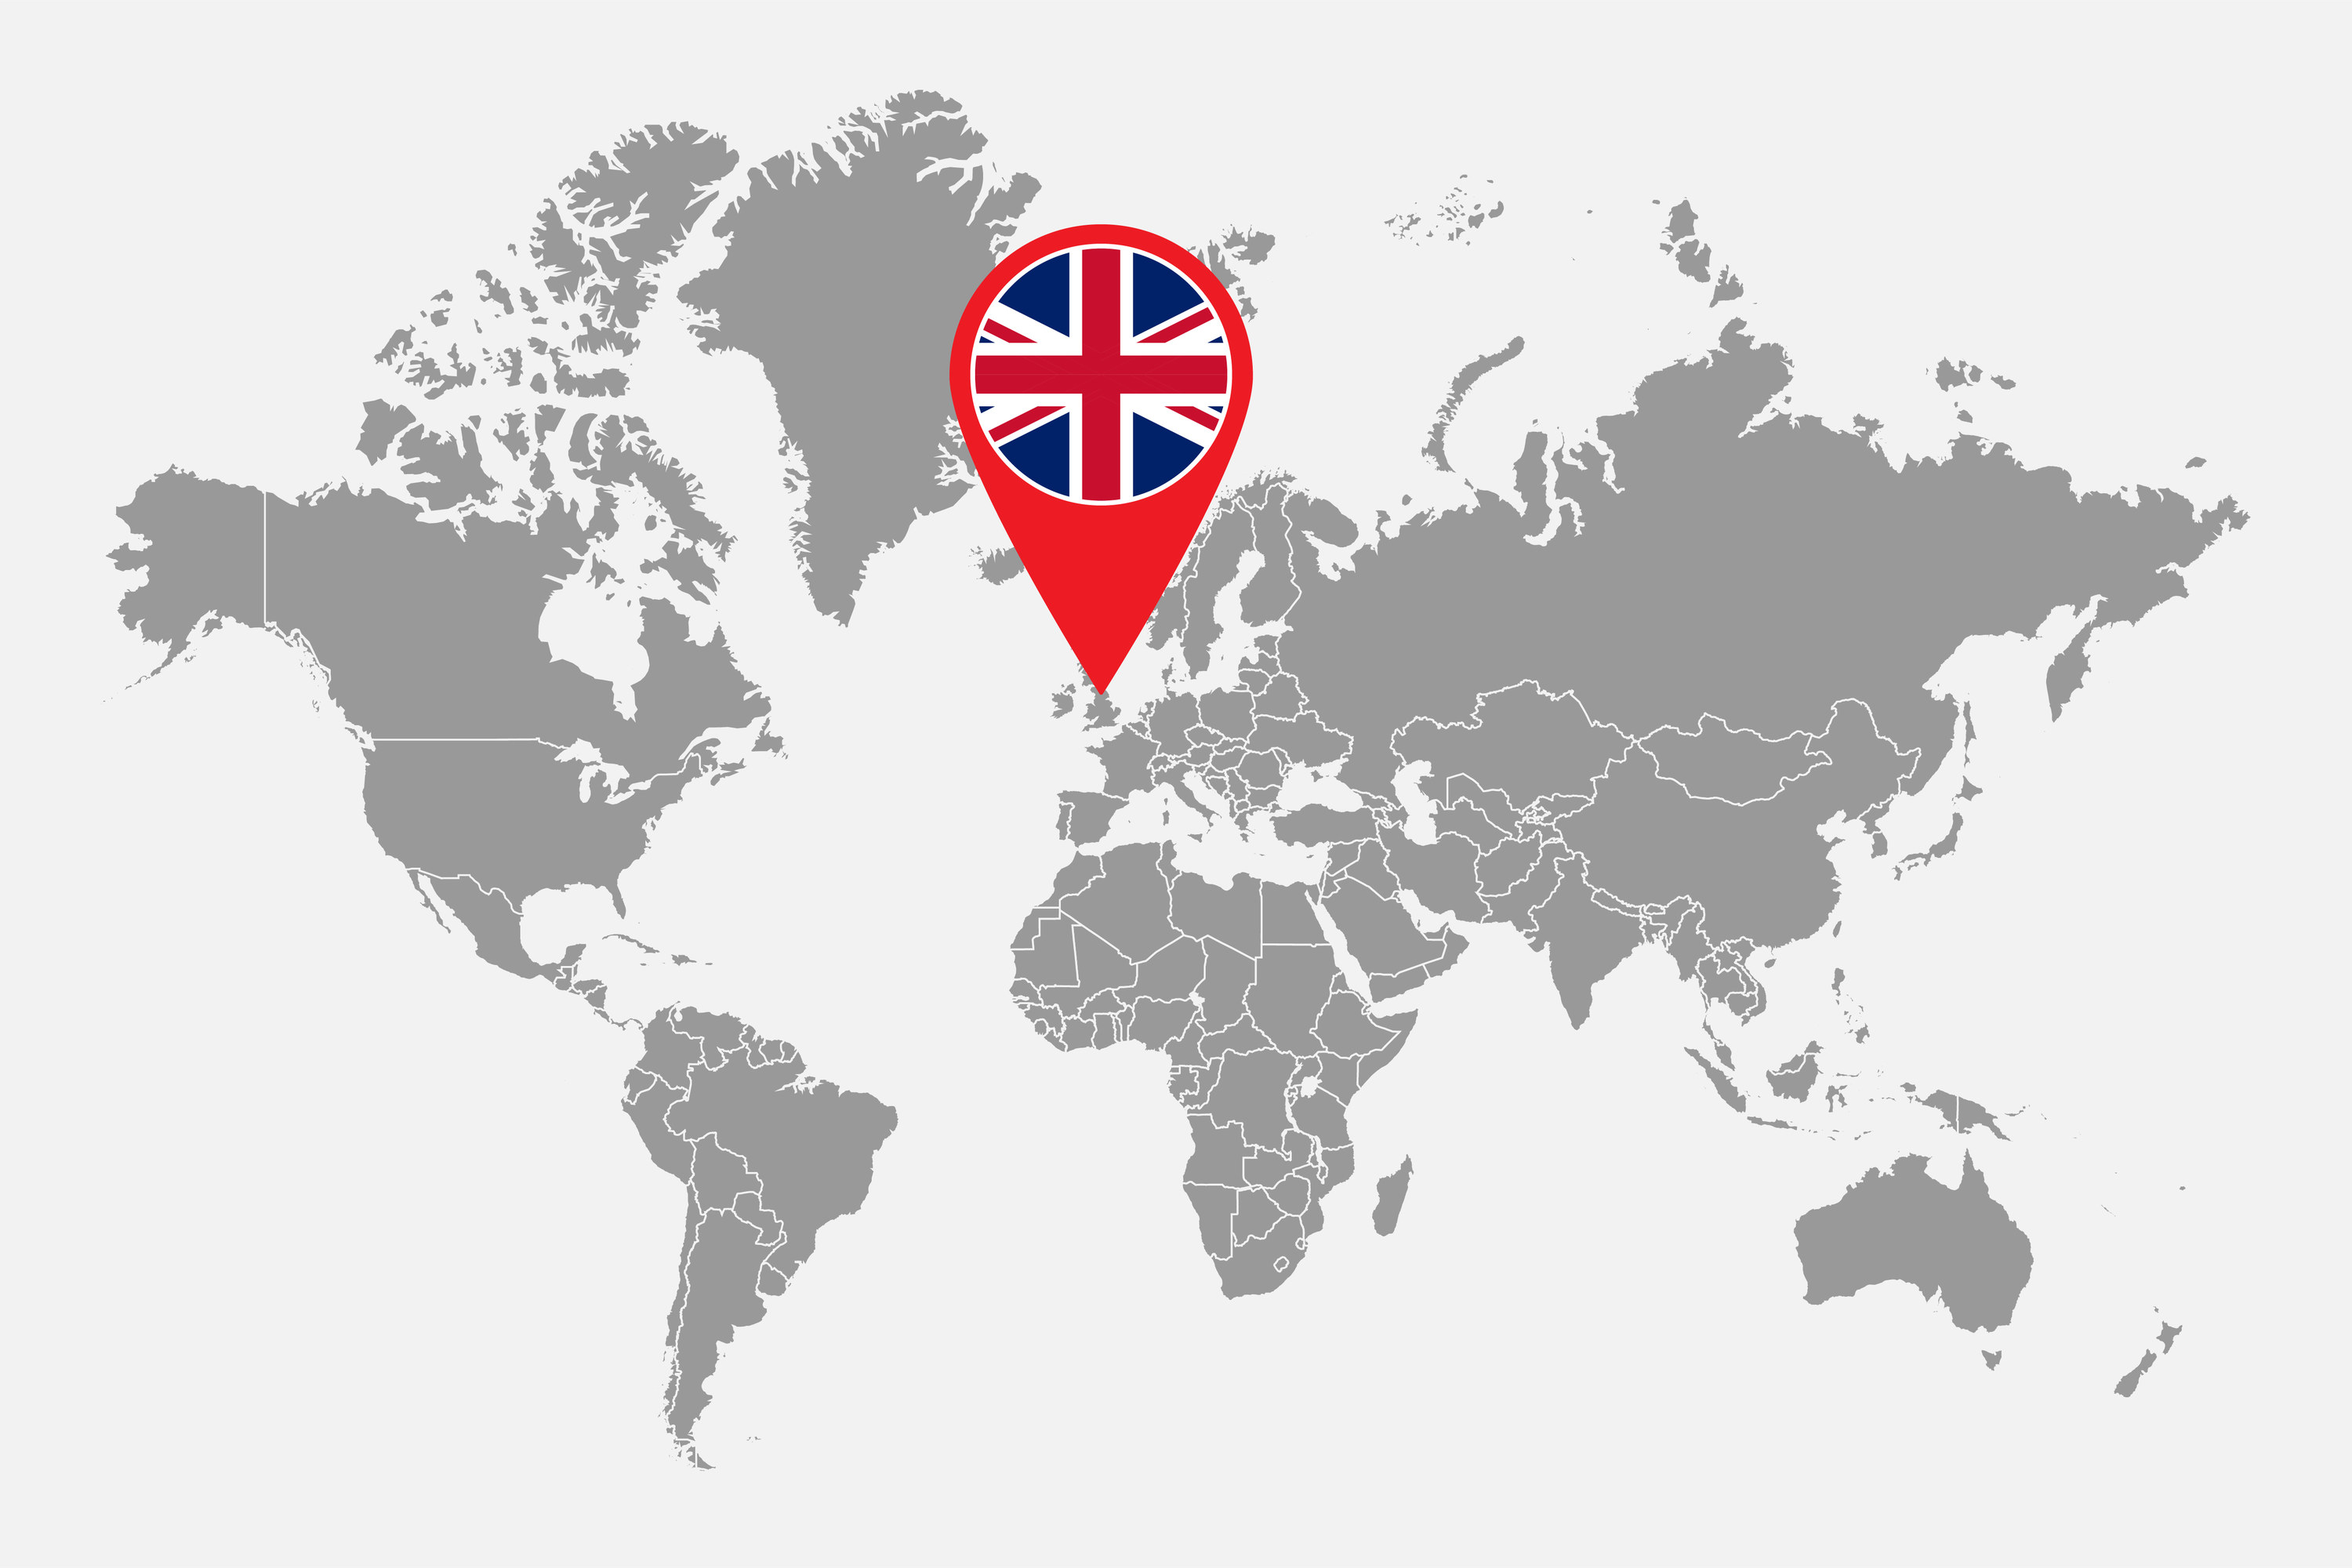 A world map with the UK indicated